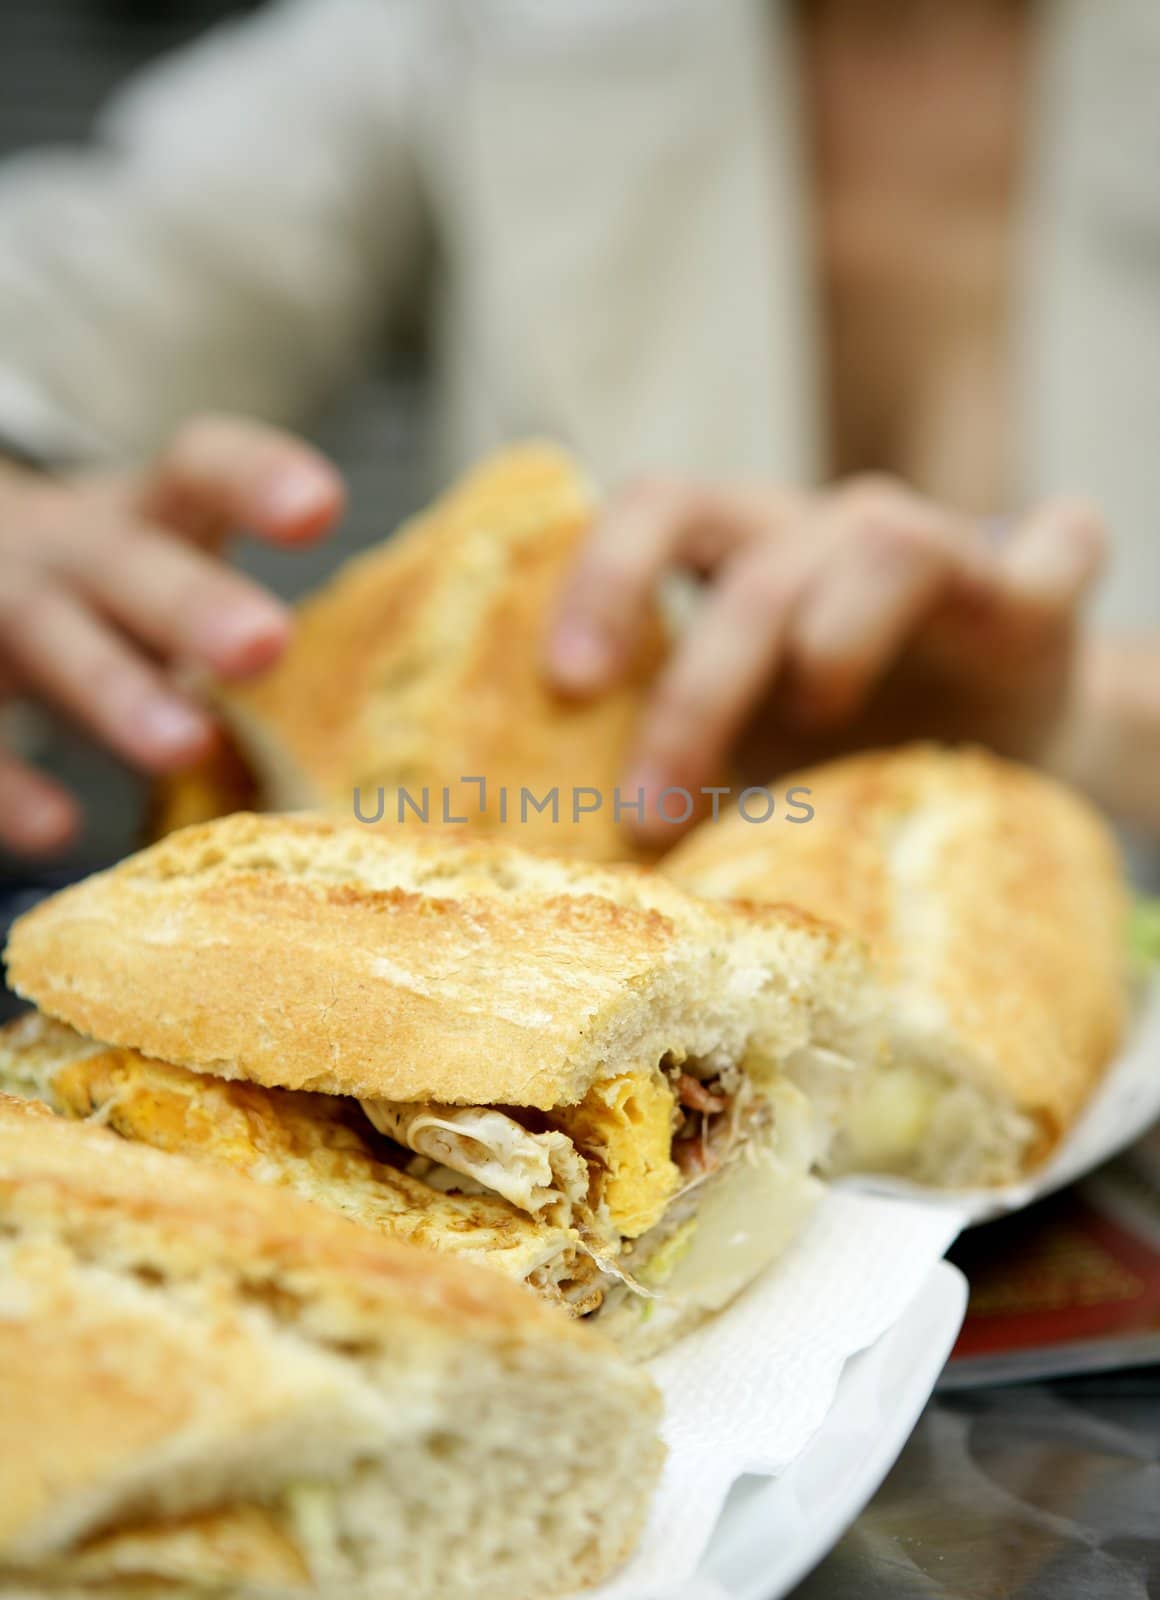 Delicious breakfast, omelet sandwich. Woman hands holding the food